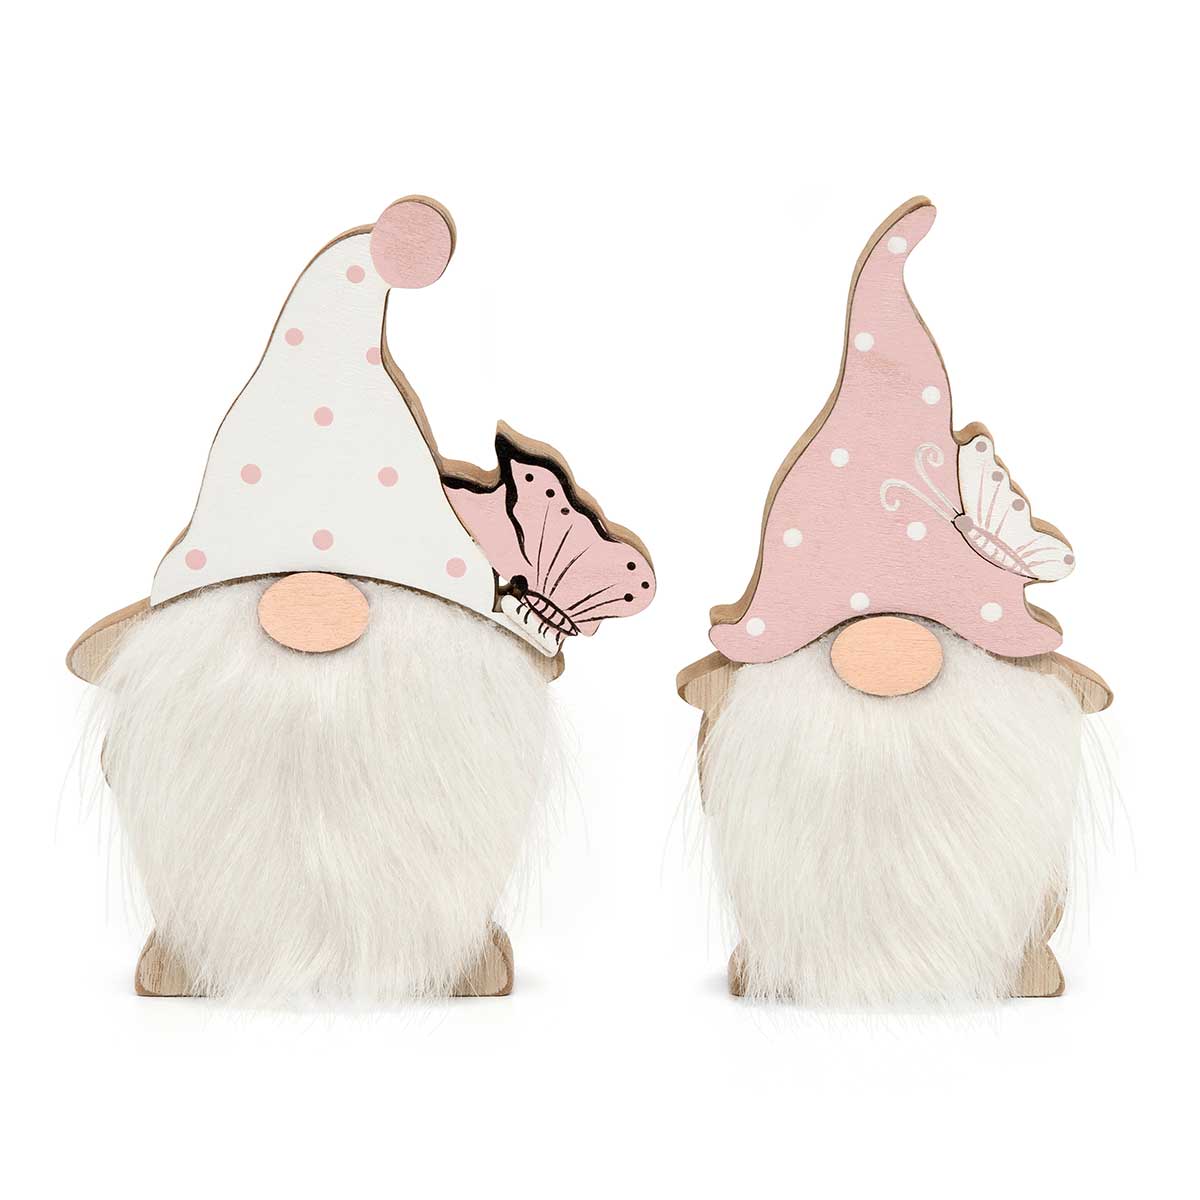 b50 WOOD GNOME SIT-A-BOUT PINK/WHITE PINDOT WITH BUTTERFLY